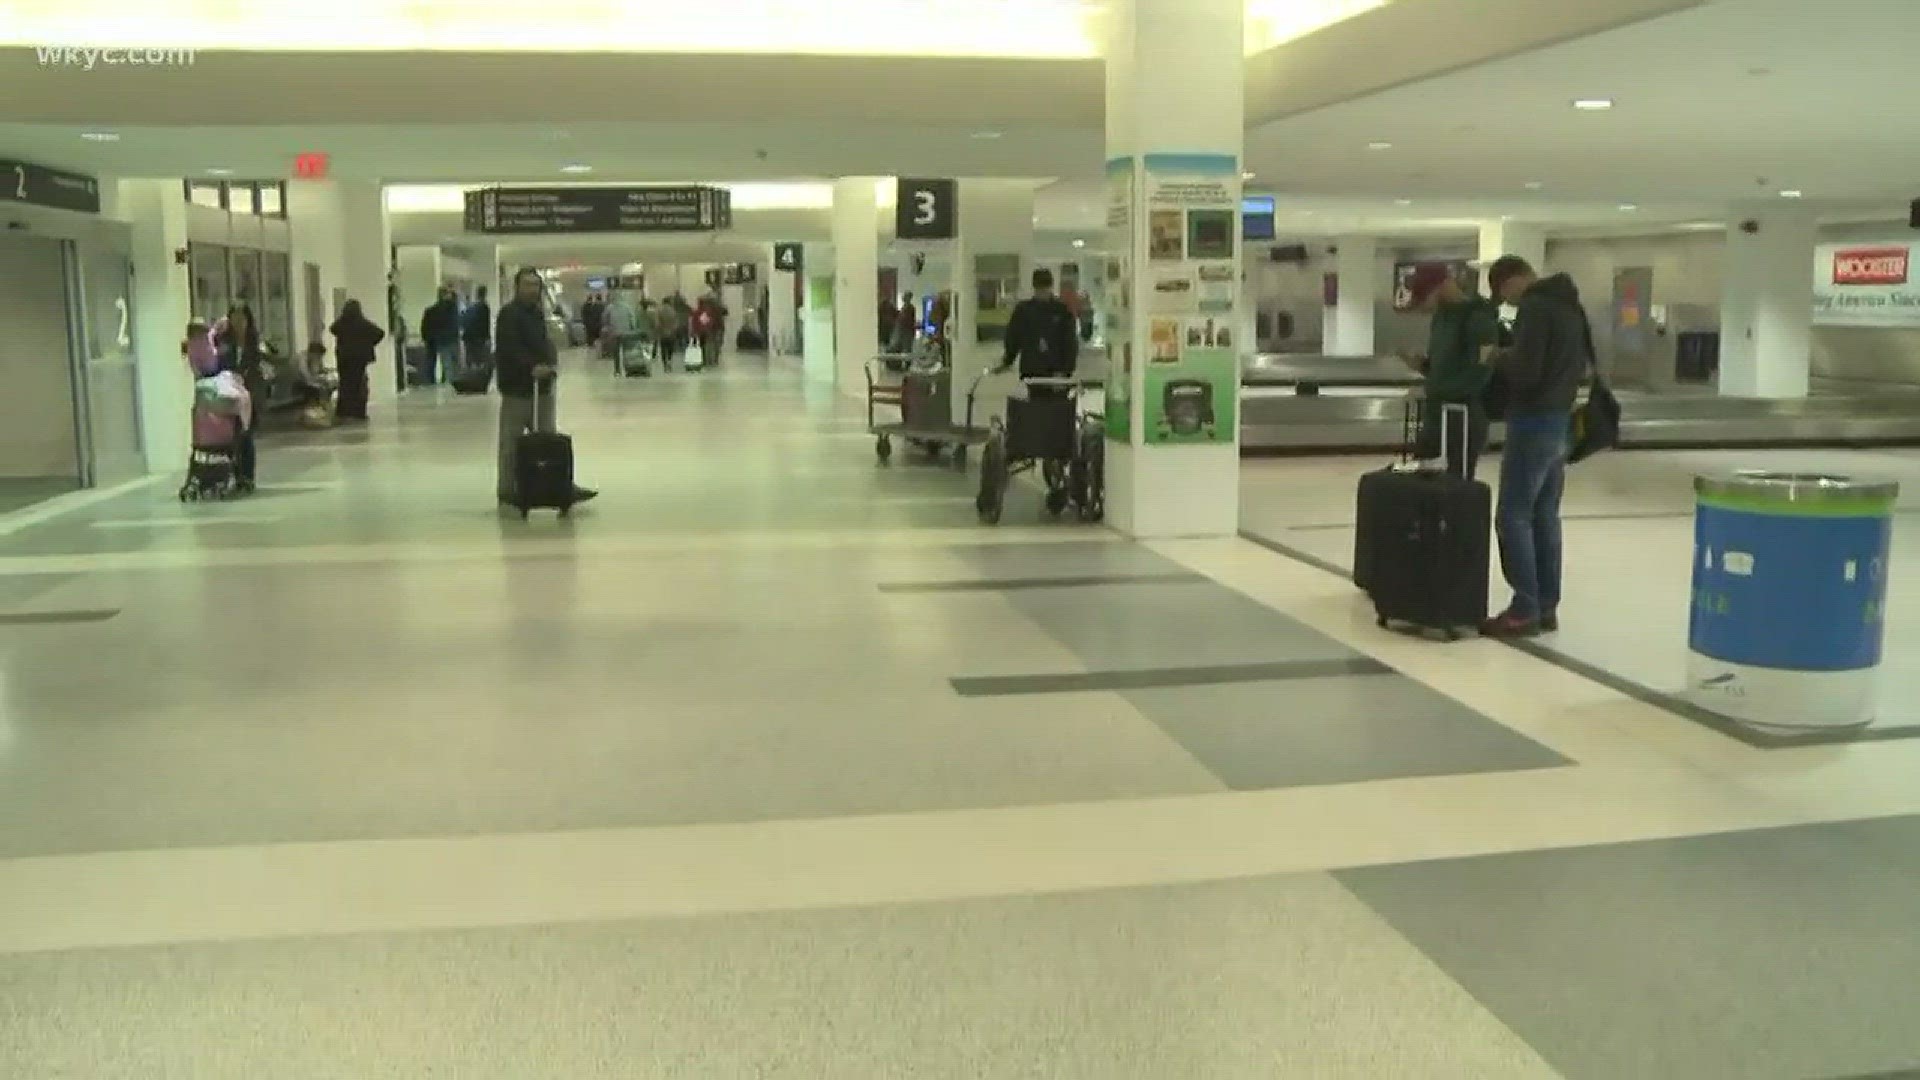 The busiest airport in the world is experiencing power outages, but locals are being impacted too